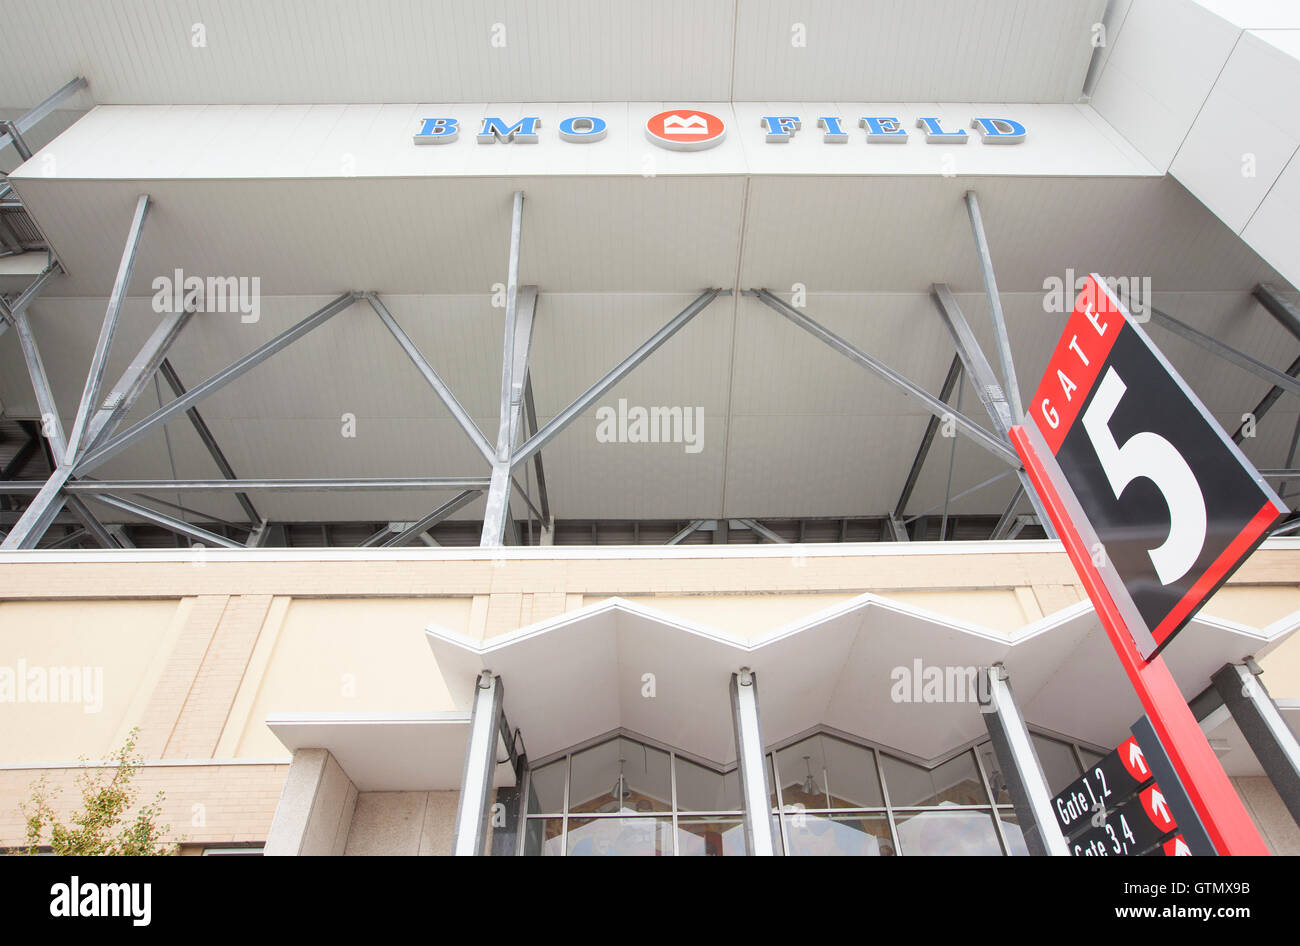 TORONTO - SEPTEMBER 1, 2016: BMO Field entrance in Toronto. The open-air structure can seat over 21,000 spectators. Stock Photo